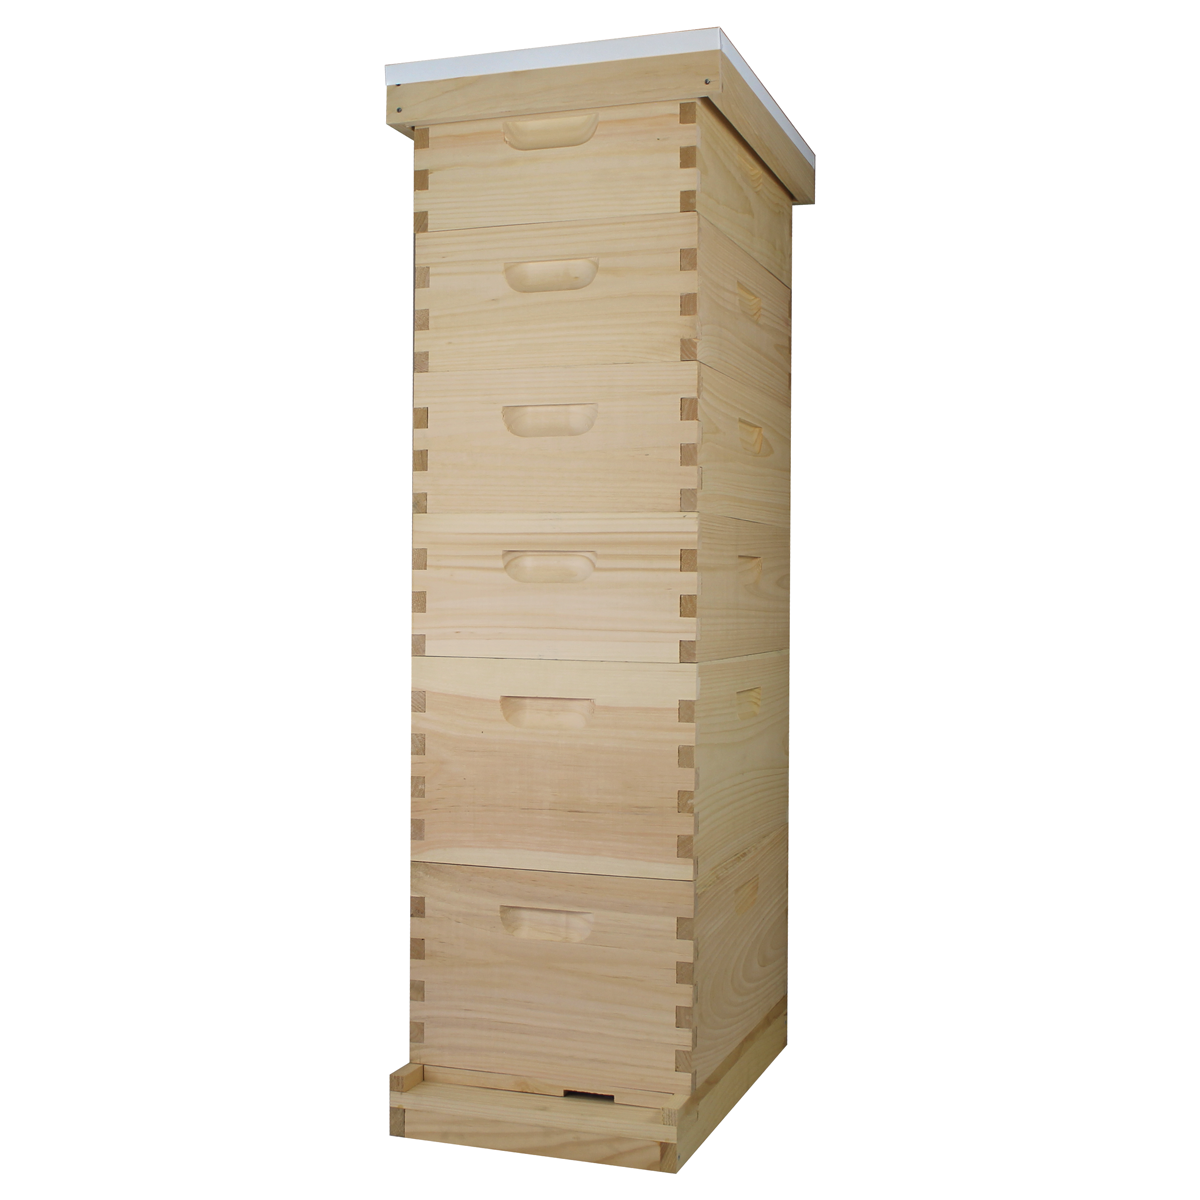 Busy Bees 'N' More Amish Made 8 Frame Beehive With 2 Deep Bee Boxes & 4 Medium Bee Boxes